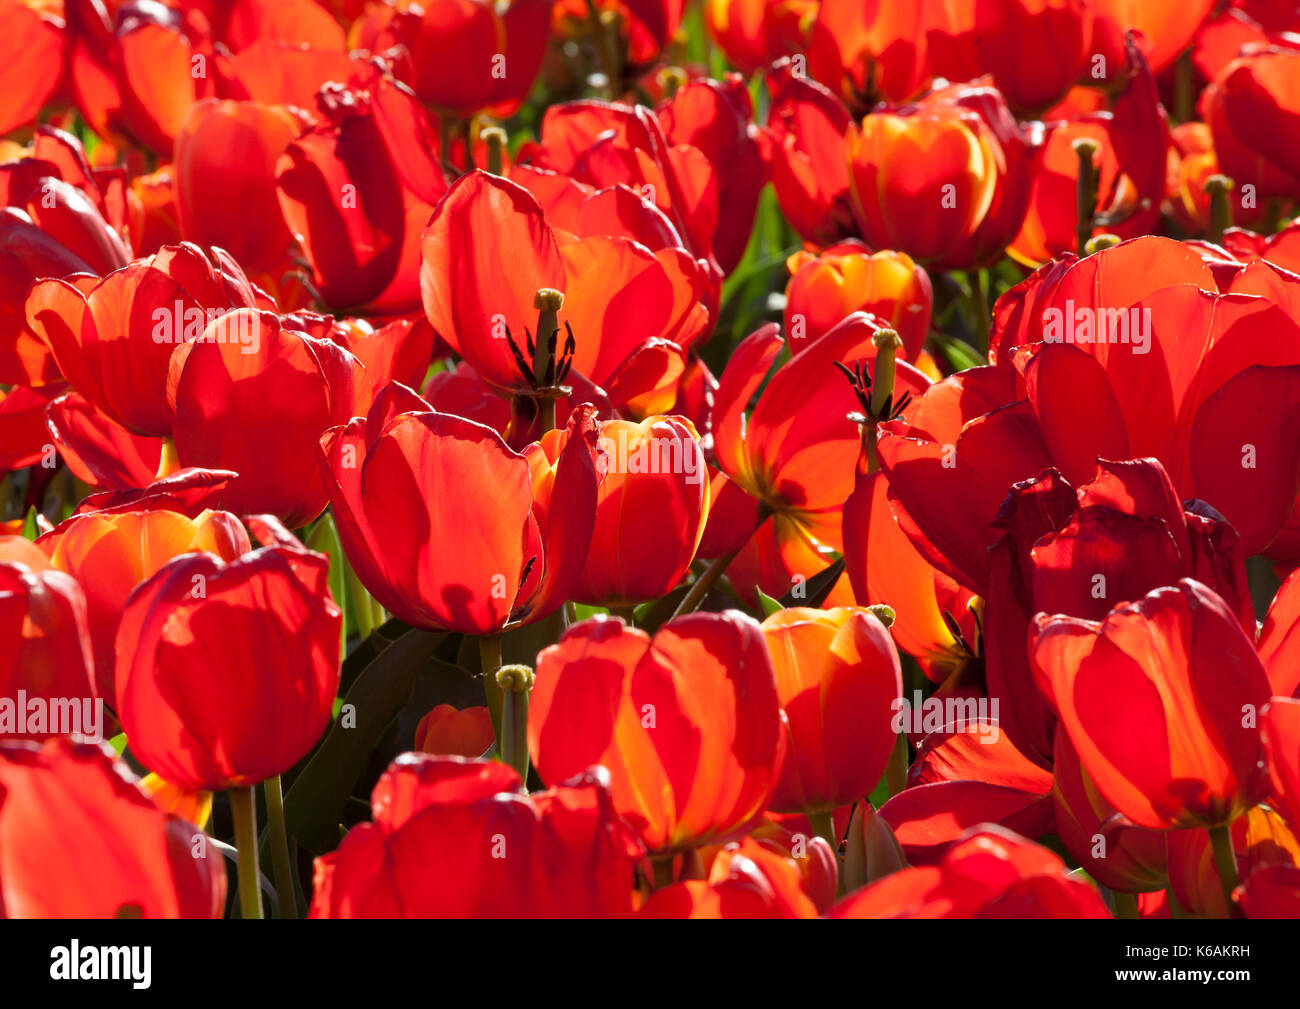 Massed red tulips growing in flower bed Stock Photo